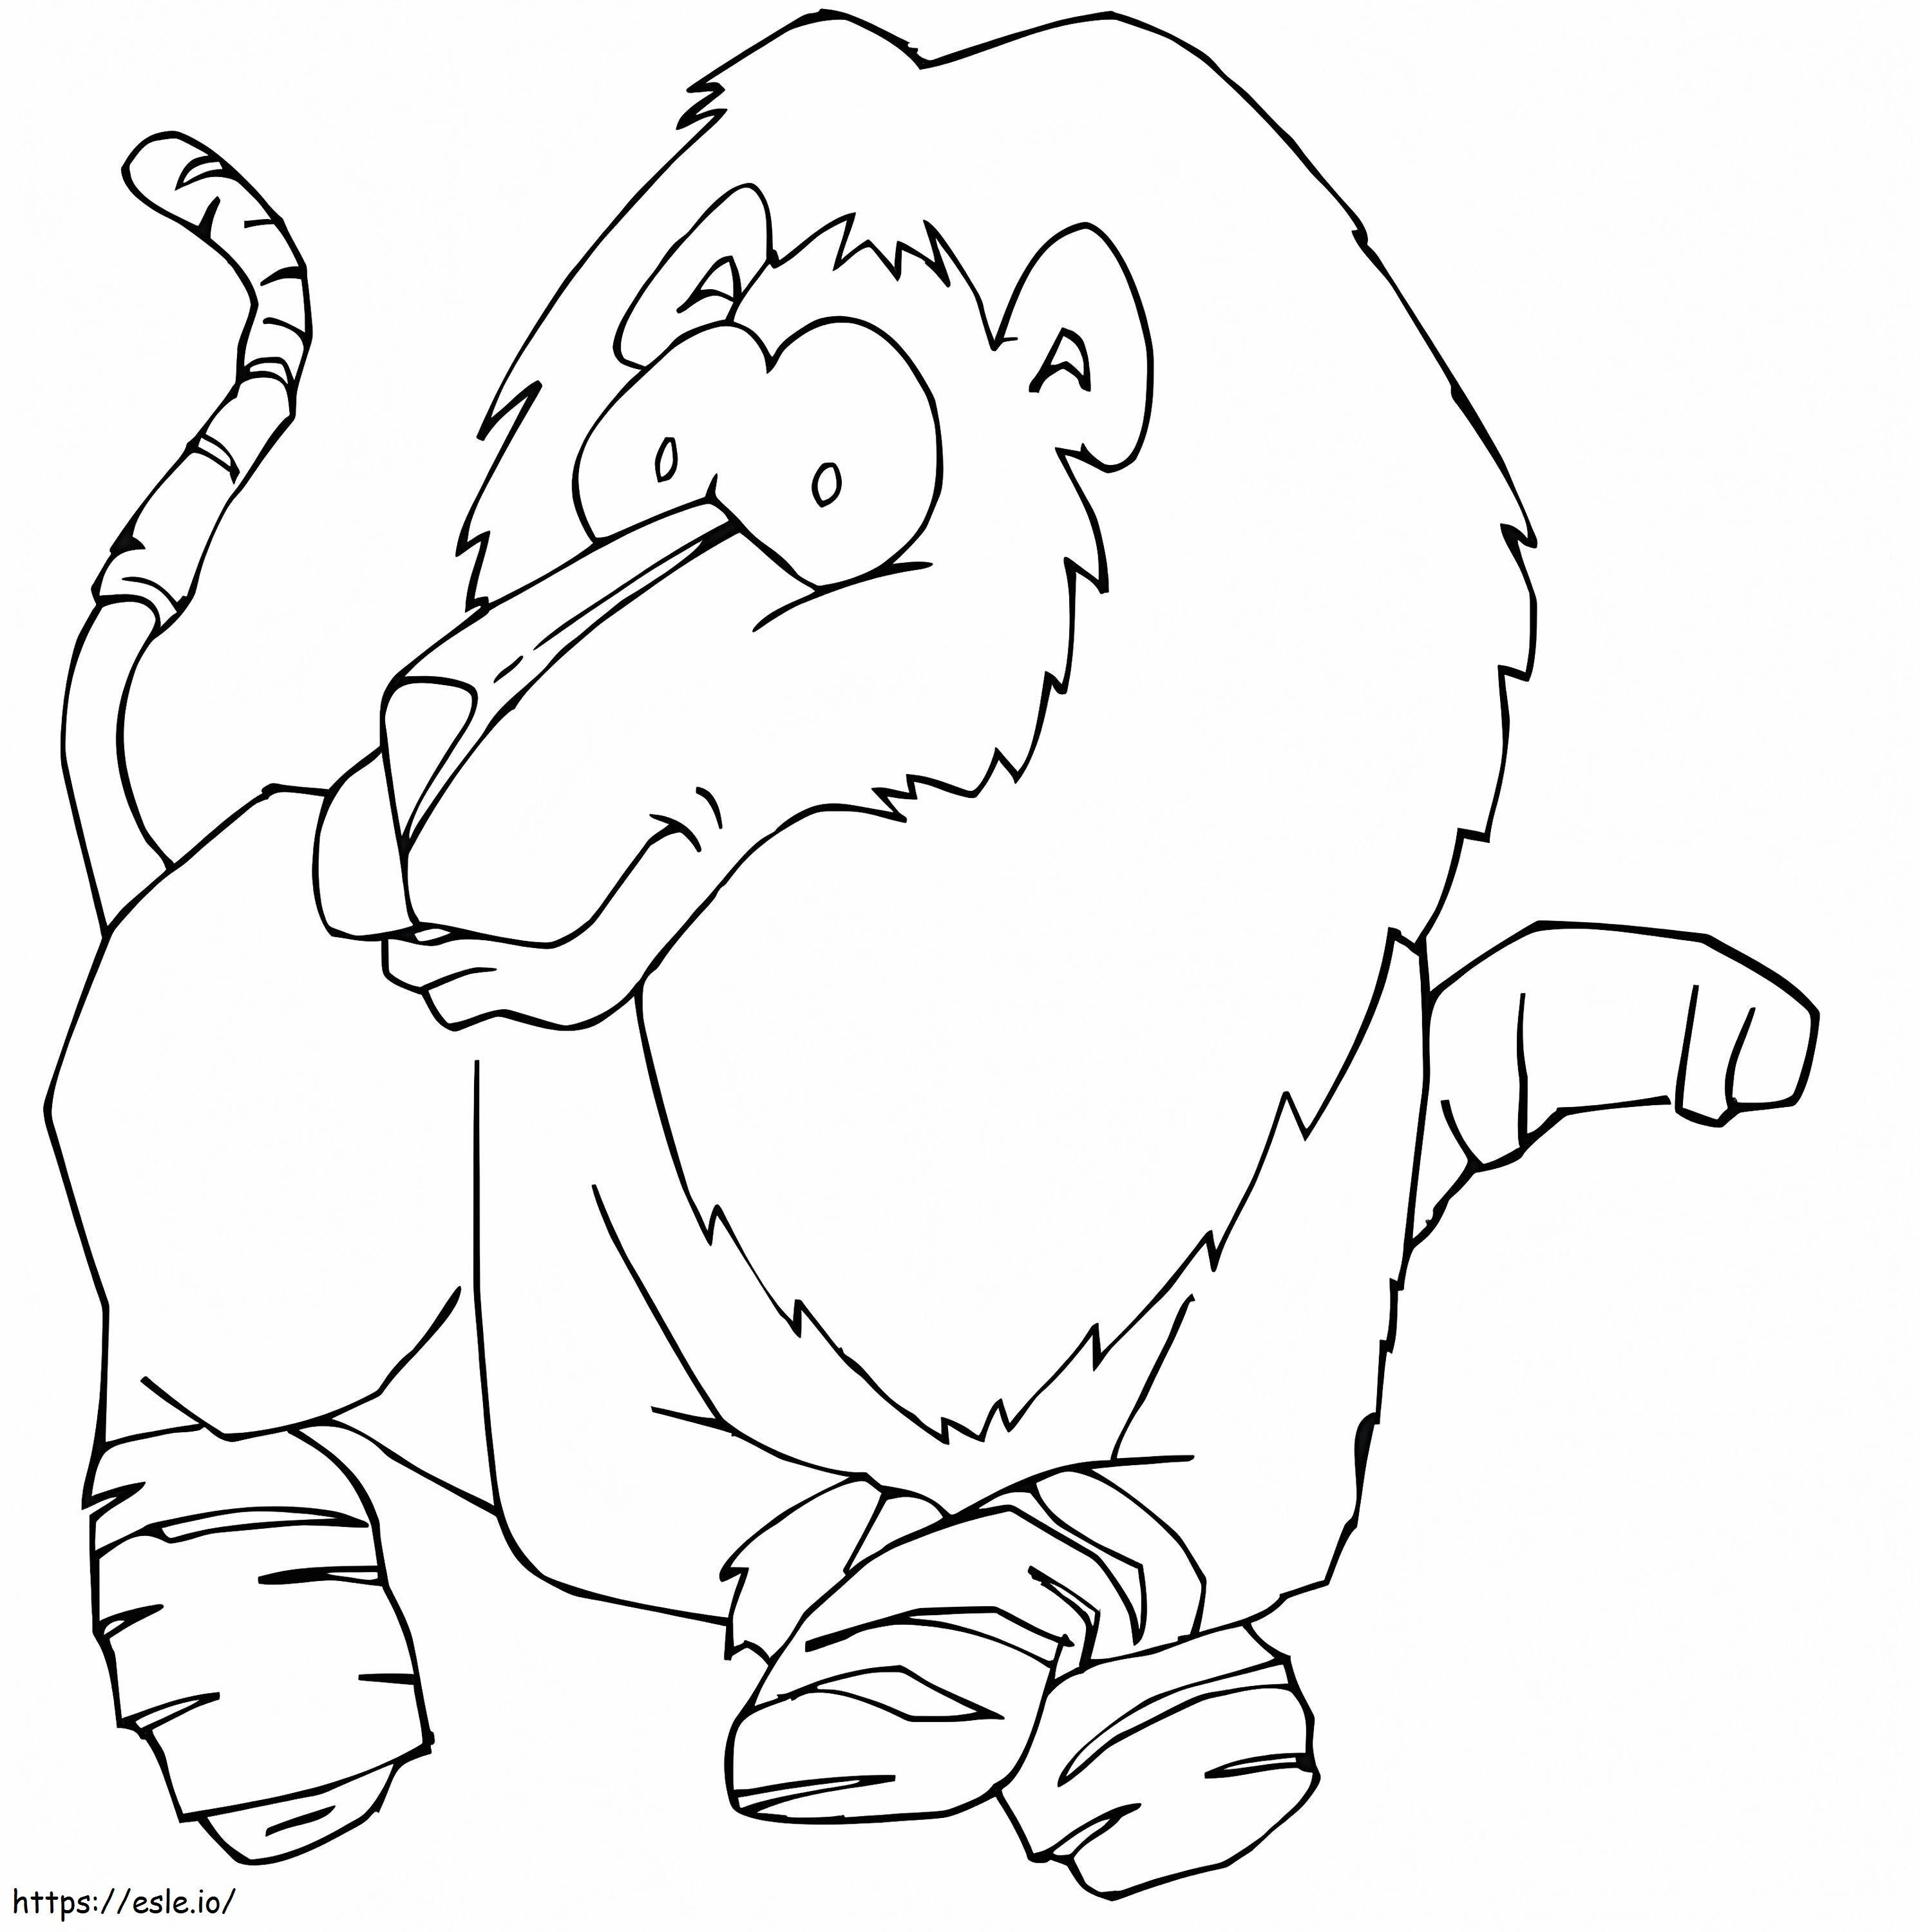 A Funny Lion coloring page